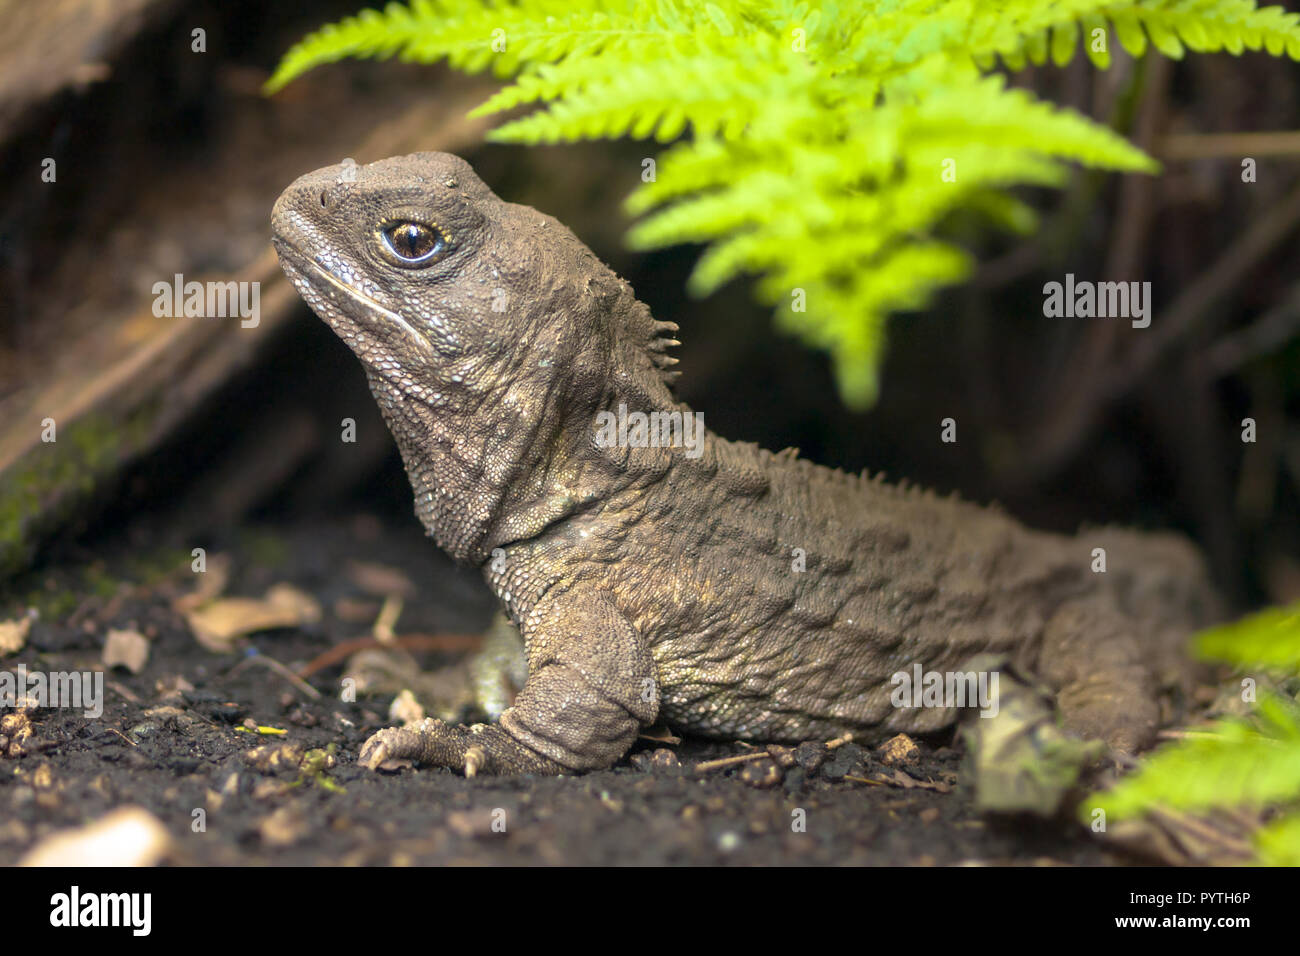 Tuatara, the living fossil, is a native and endemic reptile in new zealand. Animal in natural environment Stock Photo